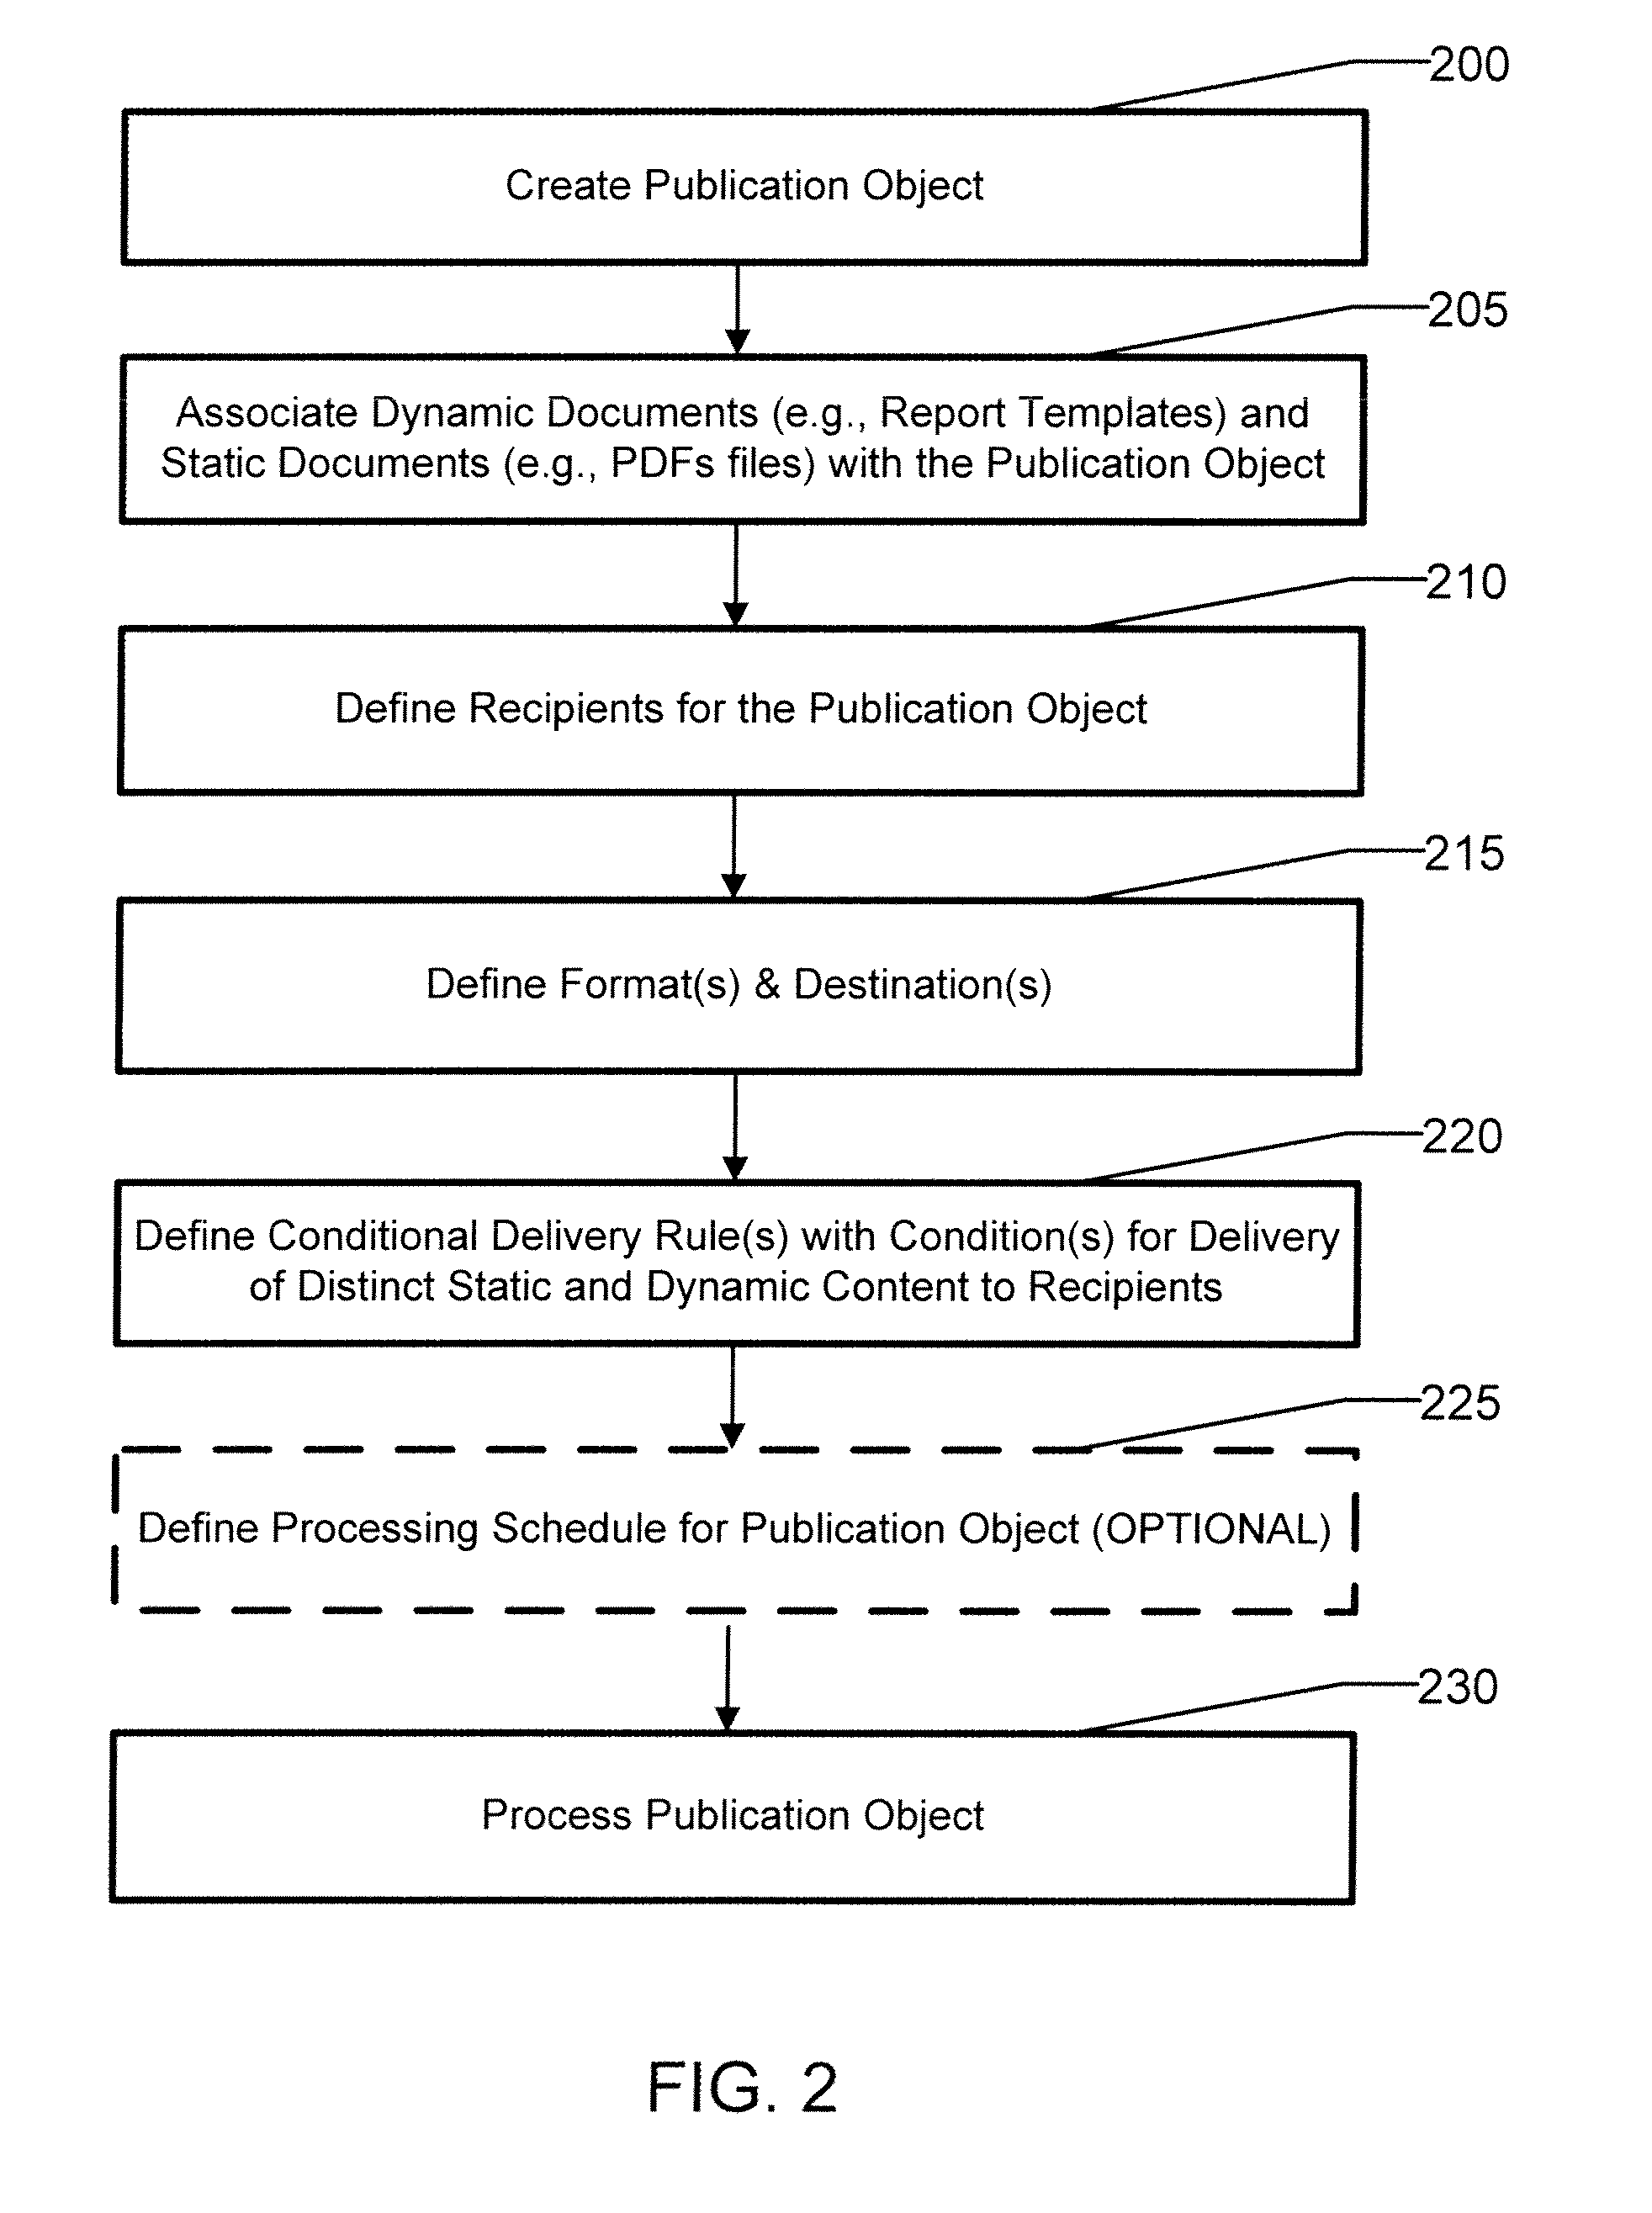 Apparatus and method for creating publications from static and dynamic content